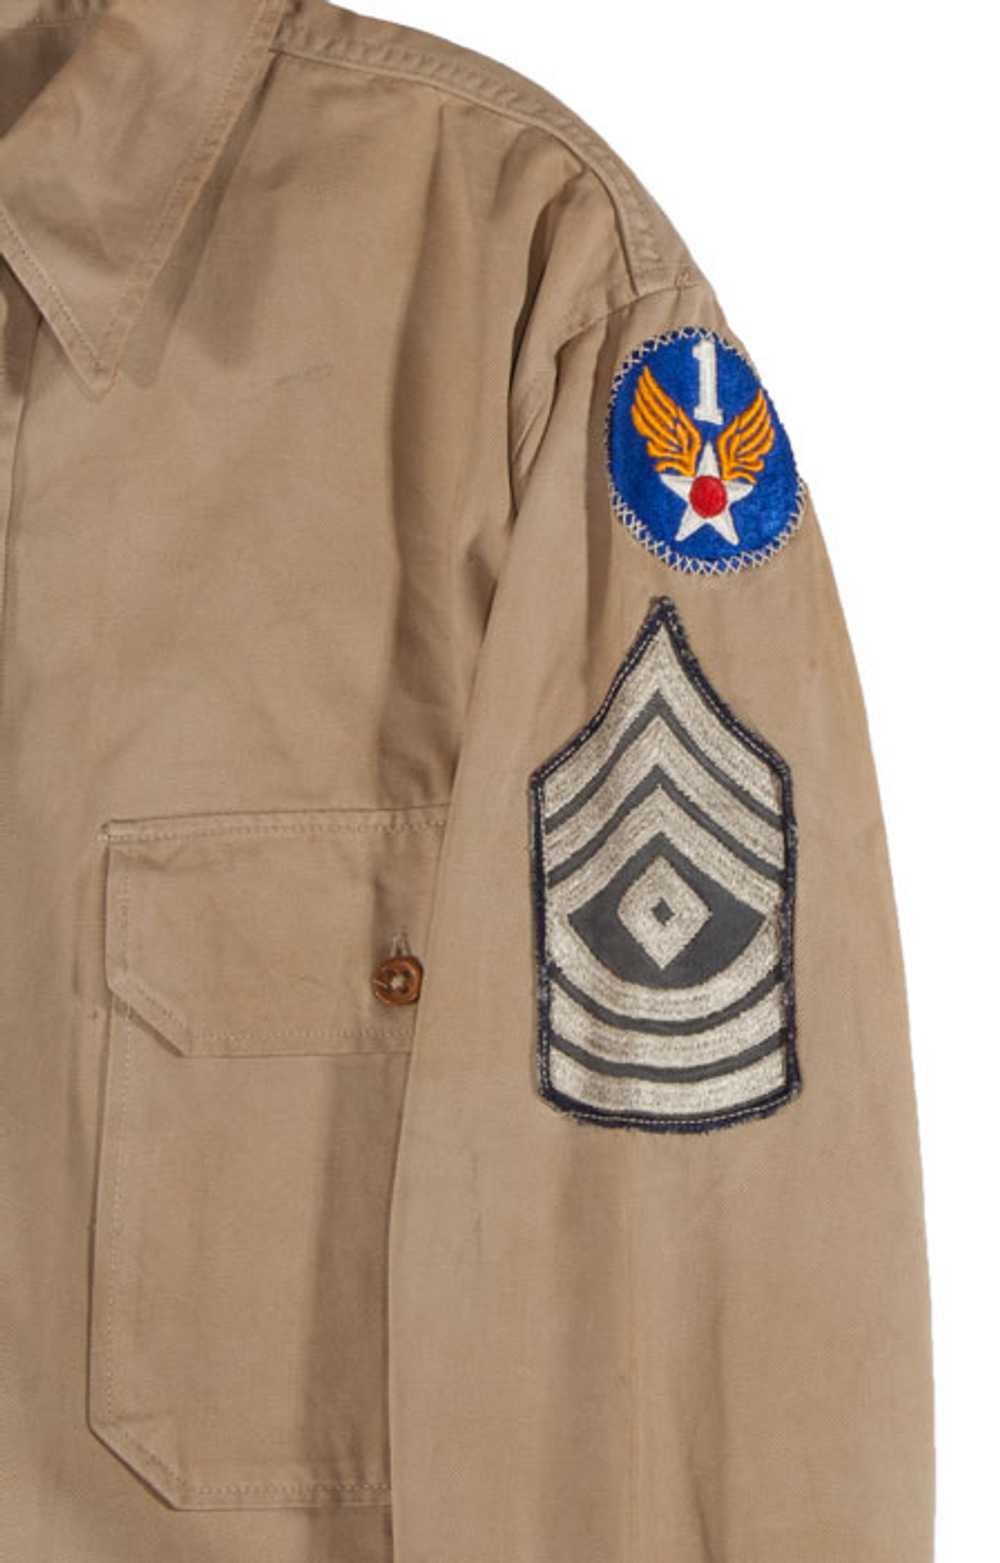 WWII 1st Air Force 1st Sgt. Khaki Shirt - image 2